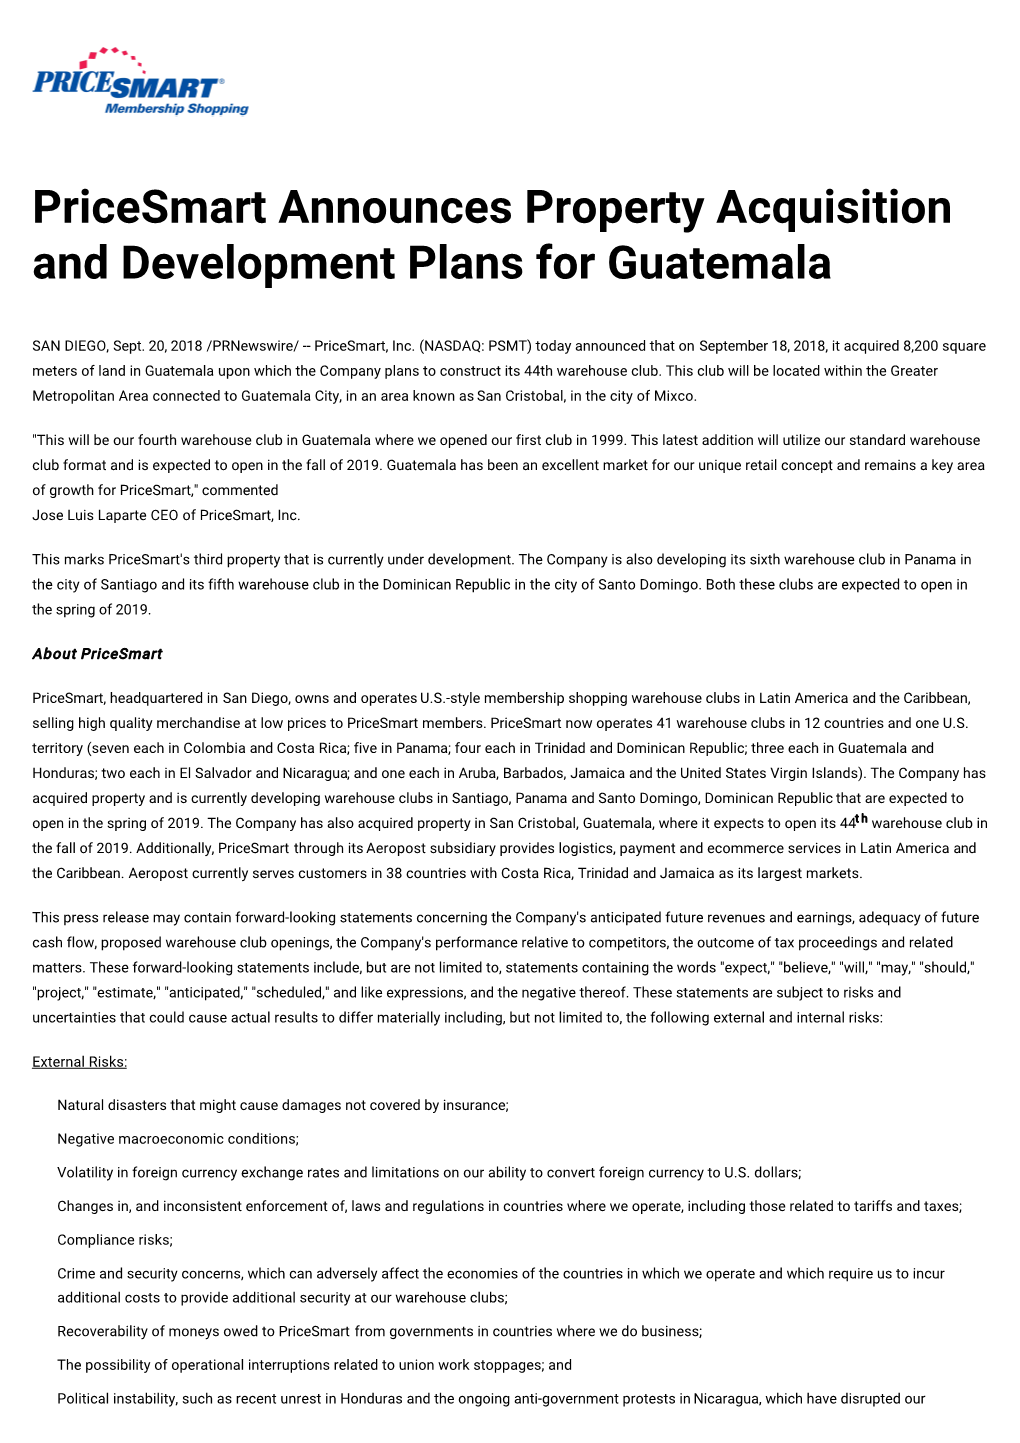 Pricesmart Announces Property Acquisition and Development Plans for Guatemala